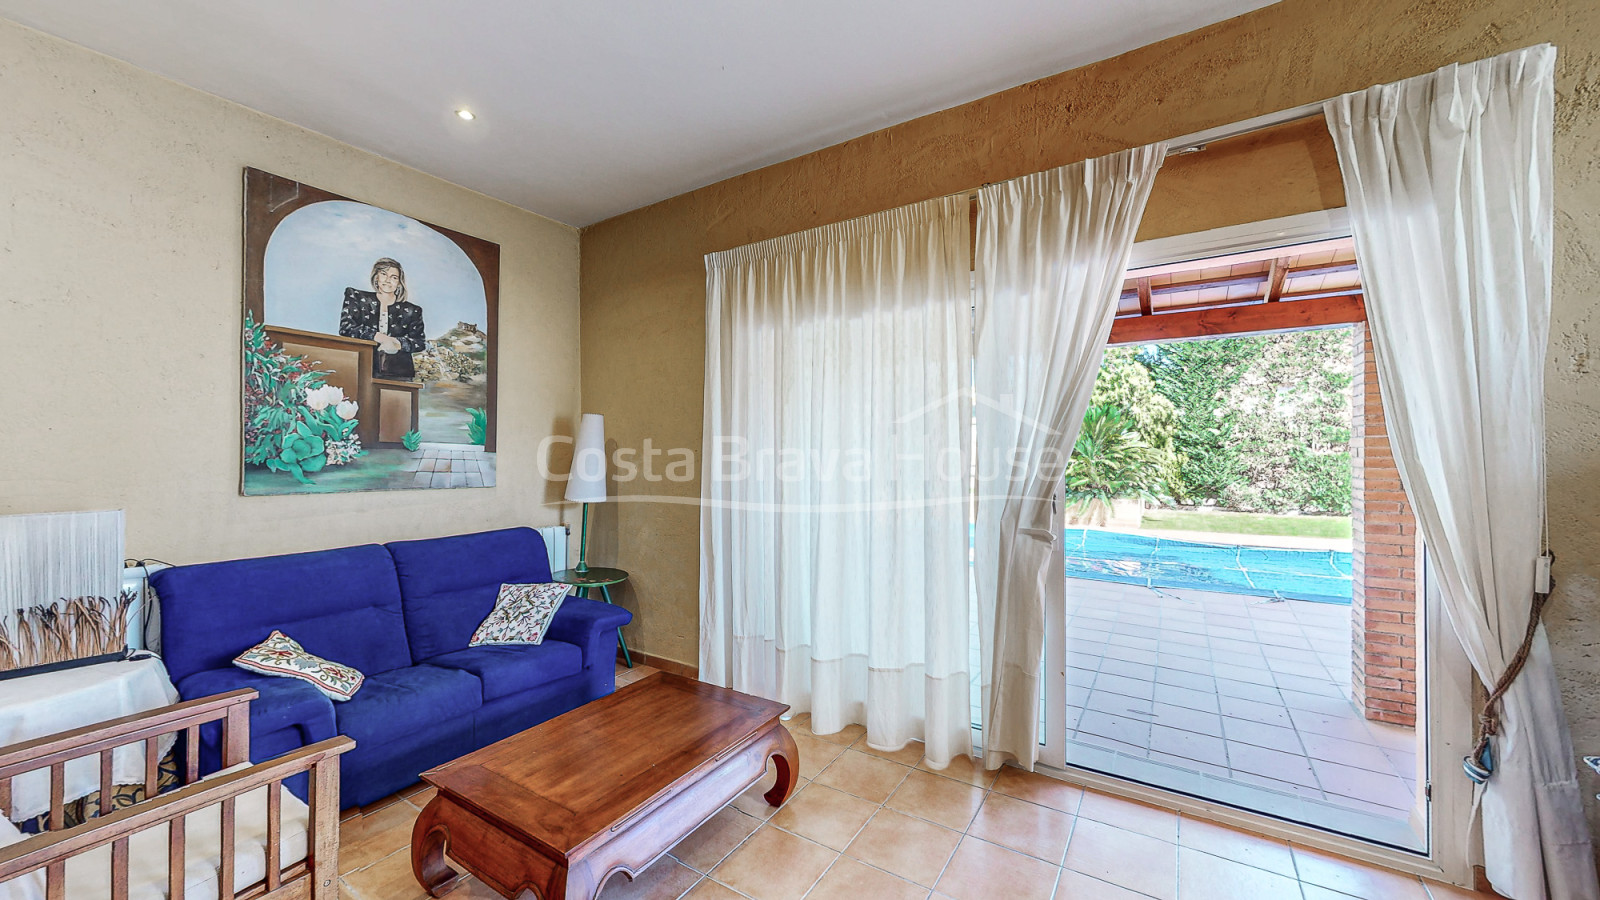 House with pool and 3 bedrooms for sale in Mont-ras